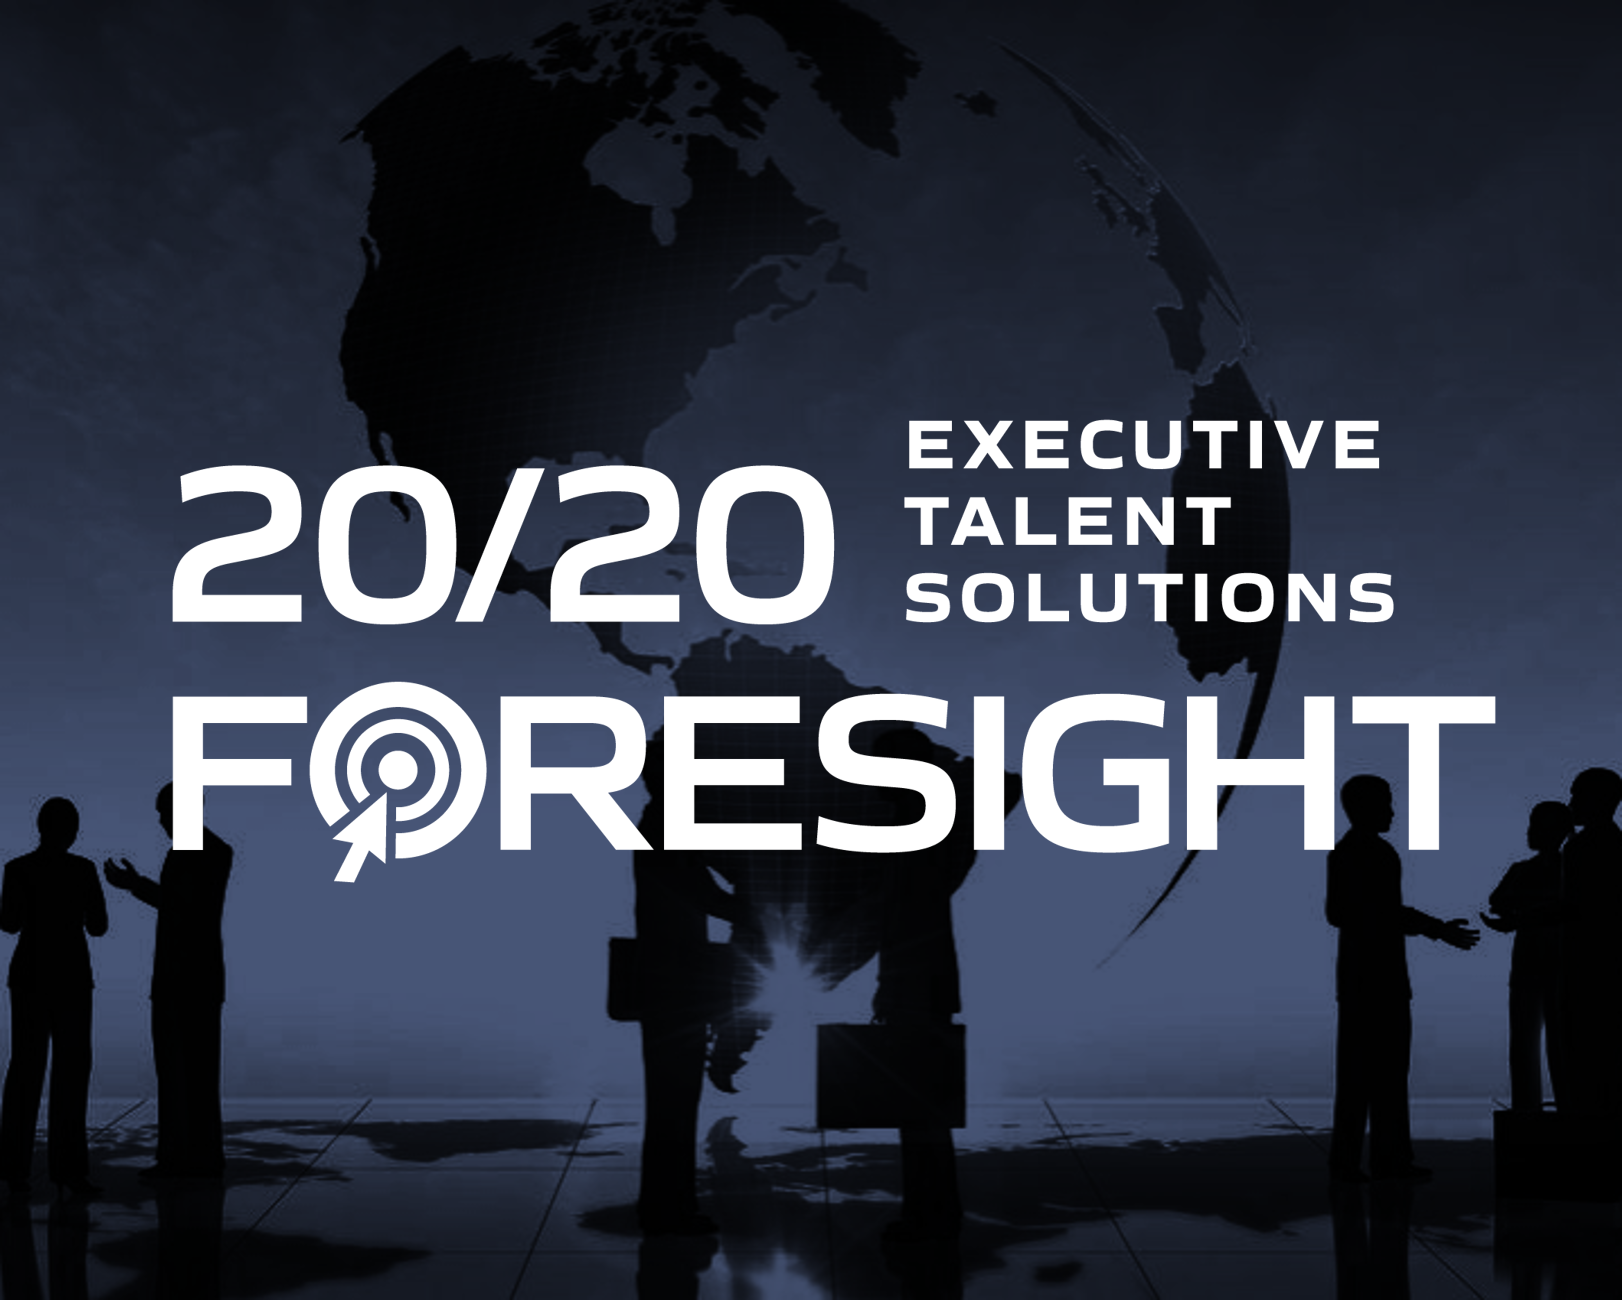 20/20 Foresight Executive Search Unveils New Identity as 20/20 Foresight Executive Talent Solutions Featured Image